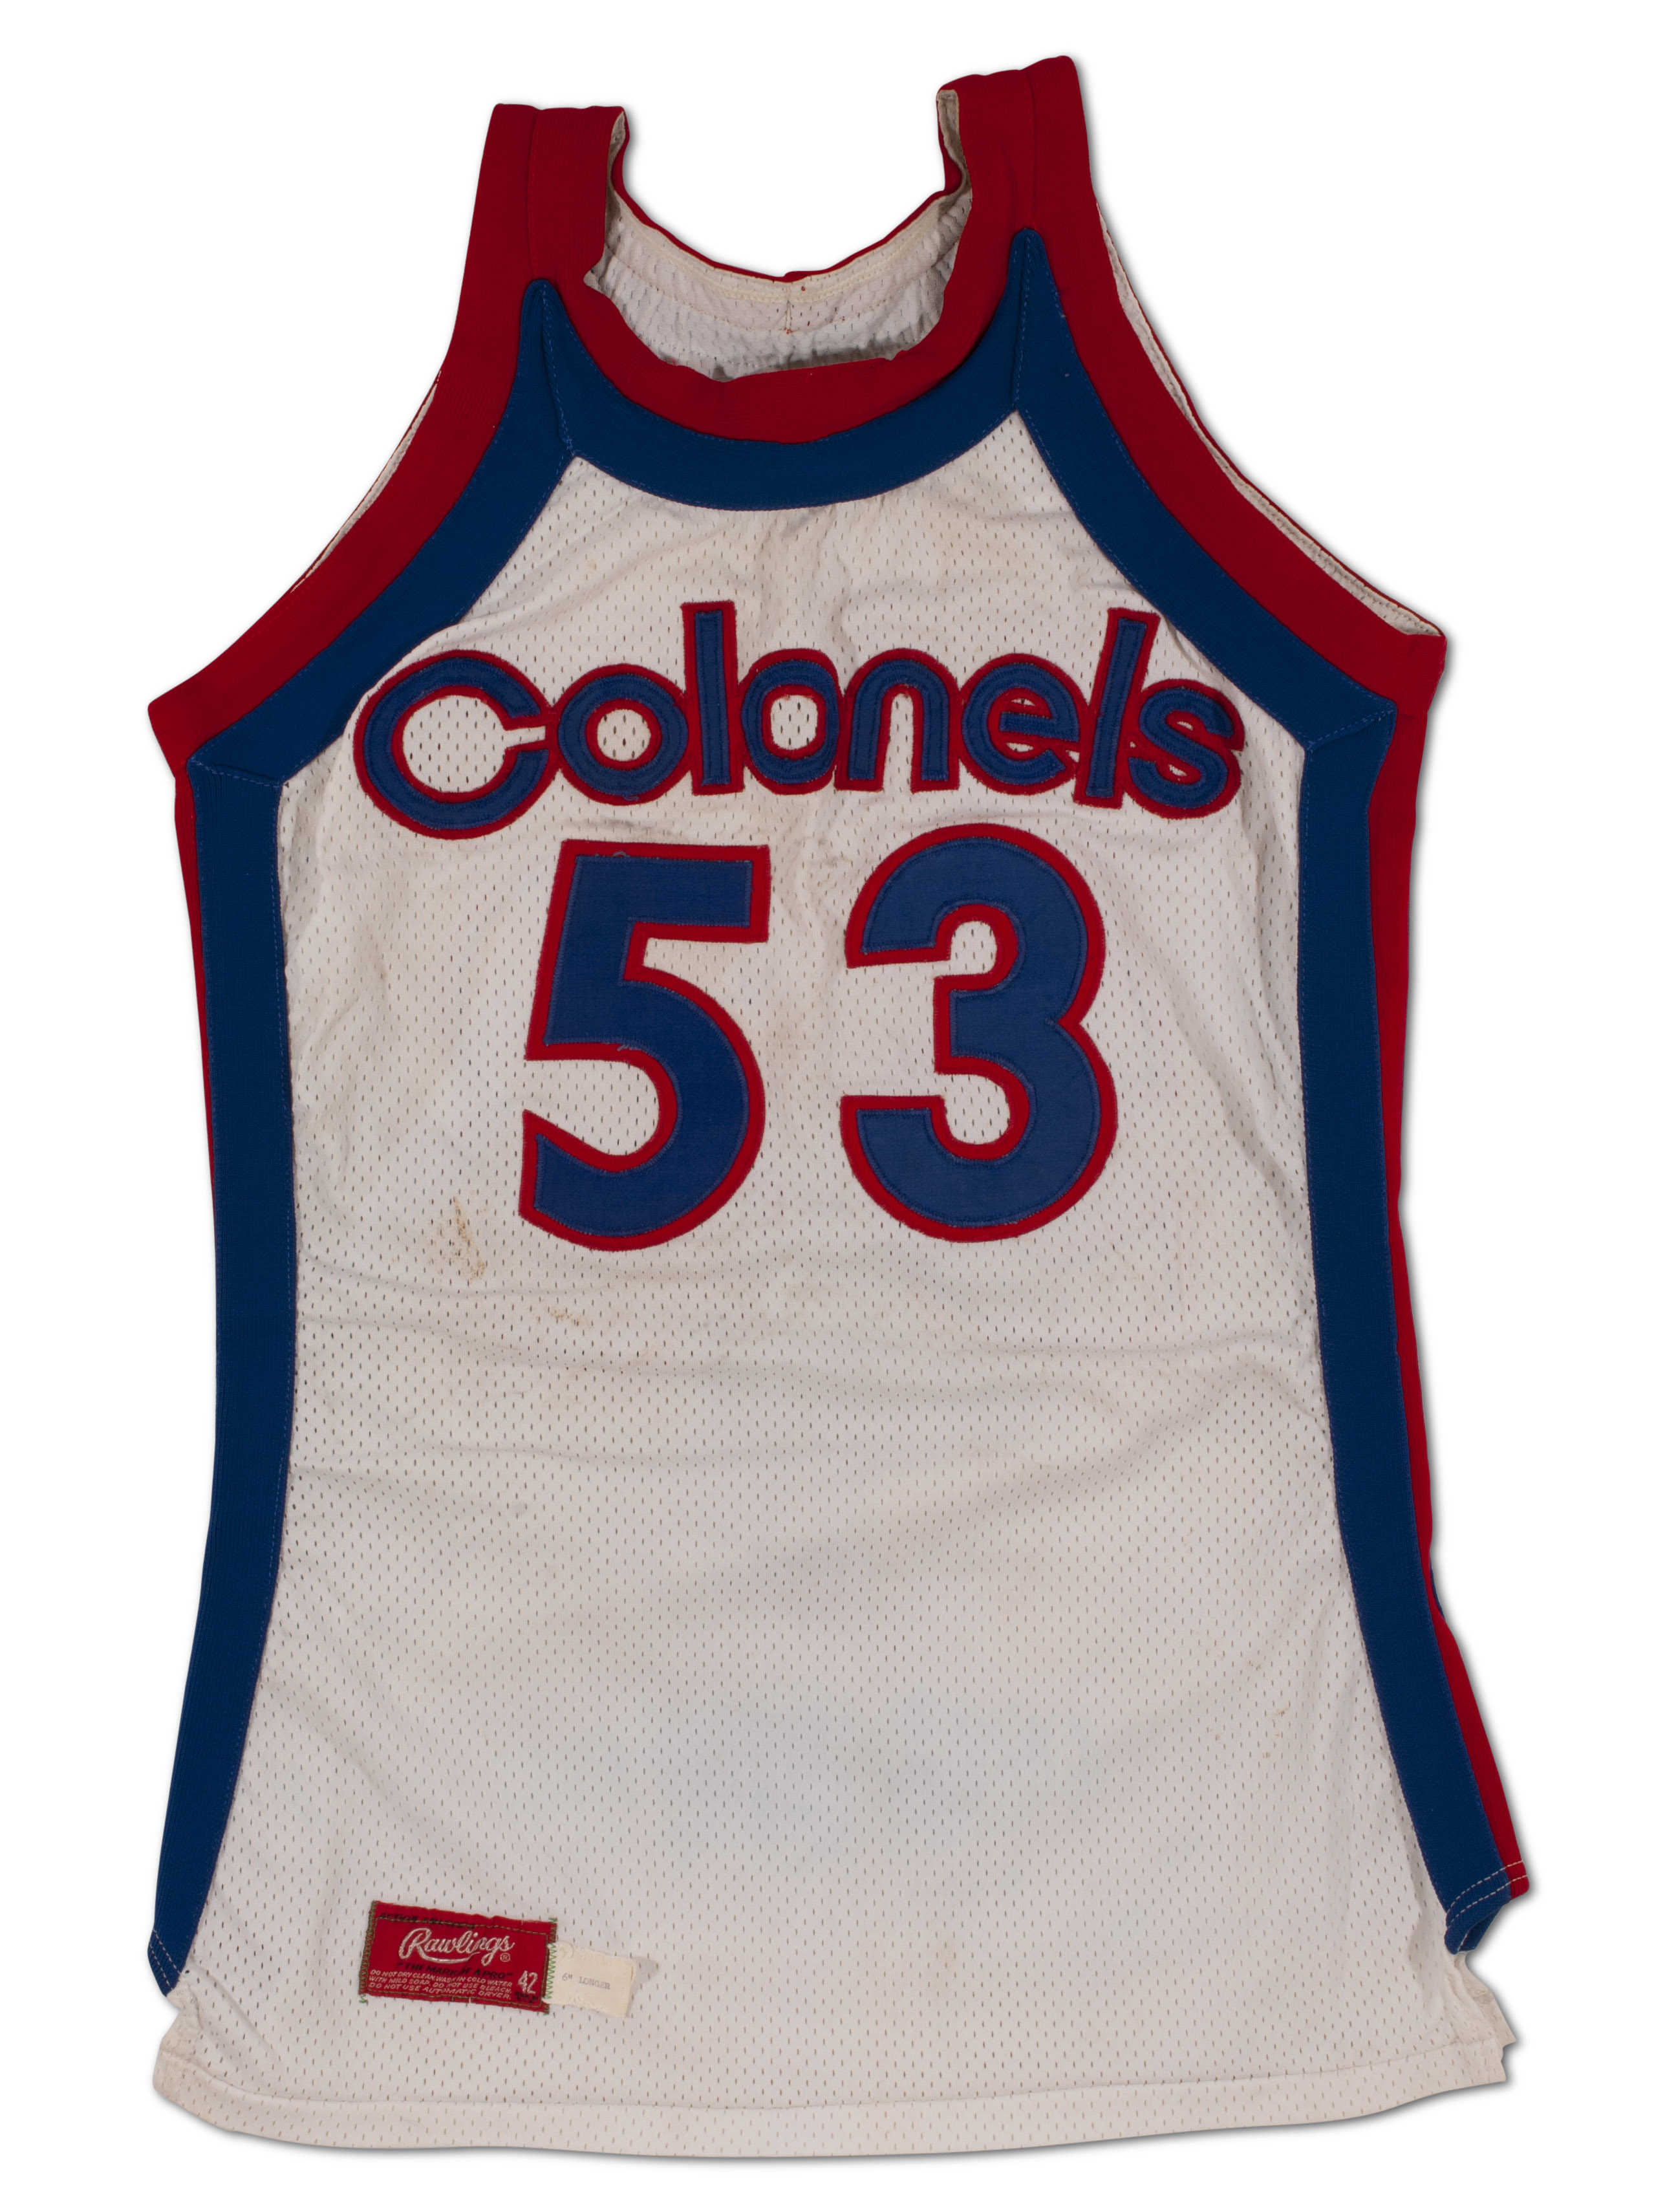 ARTIS GILMORE KENTUCKY COLONELS JERSEY BLUE NEW SEWN ANY SIZE 